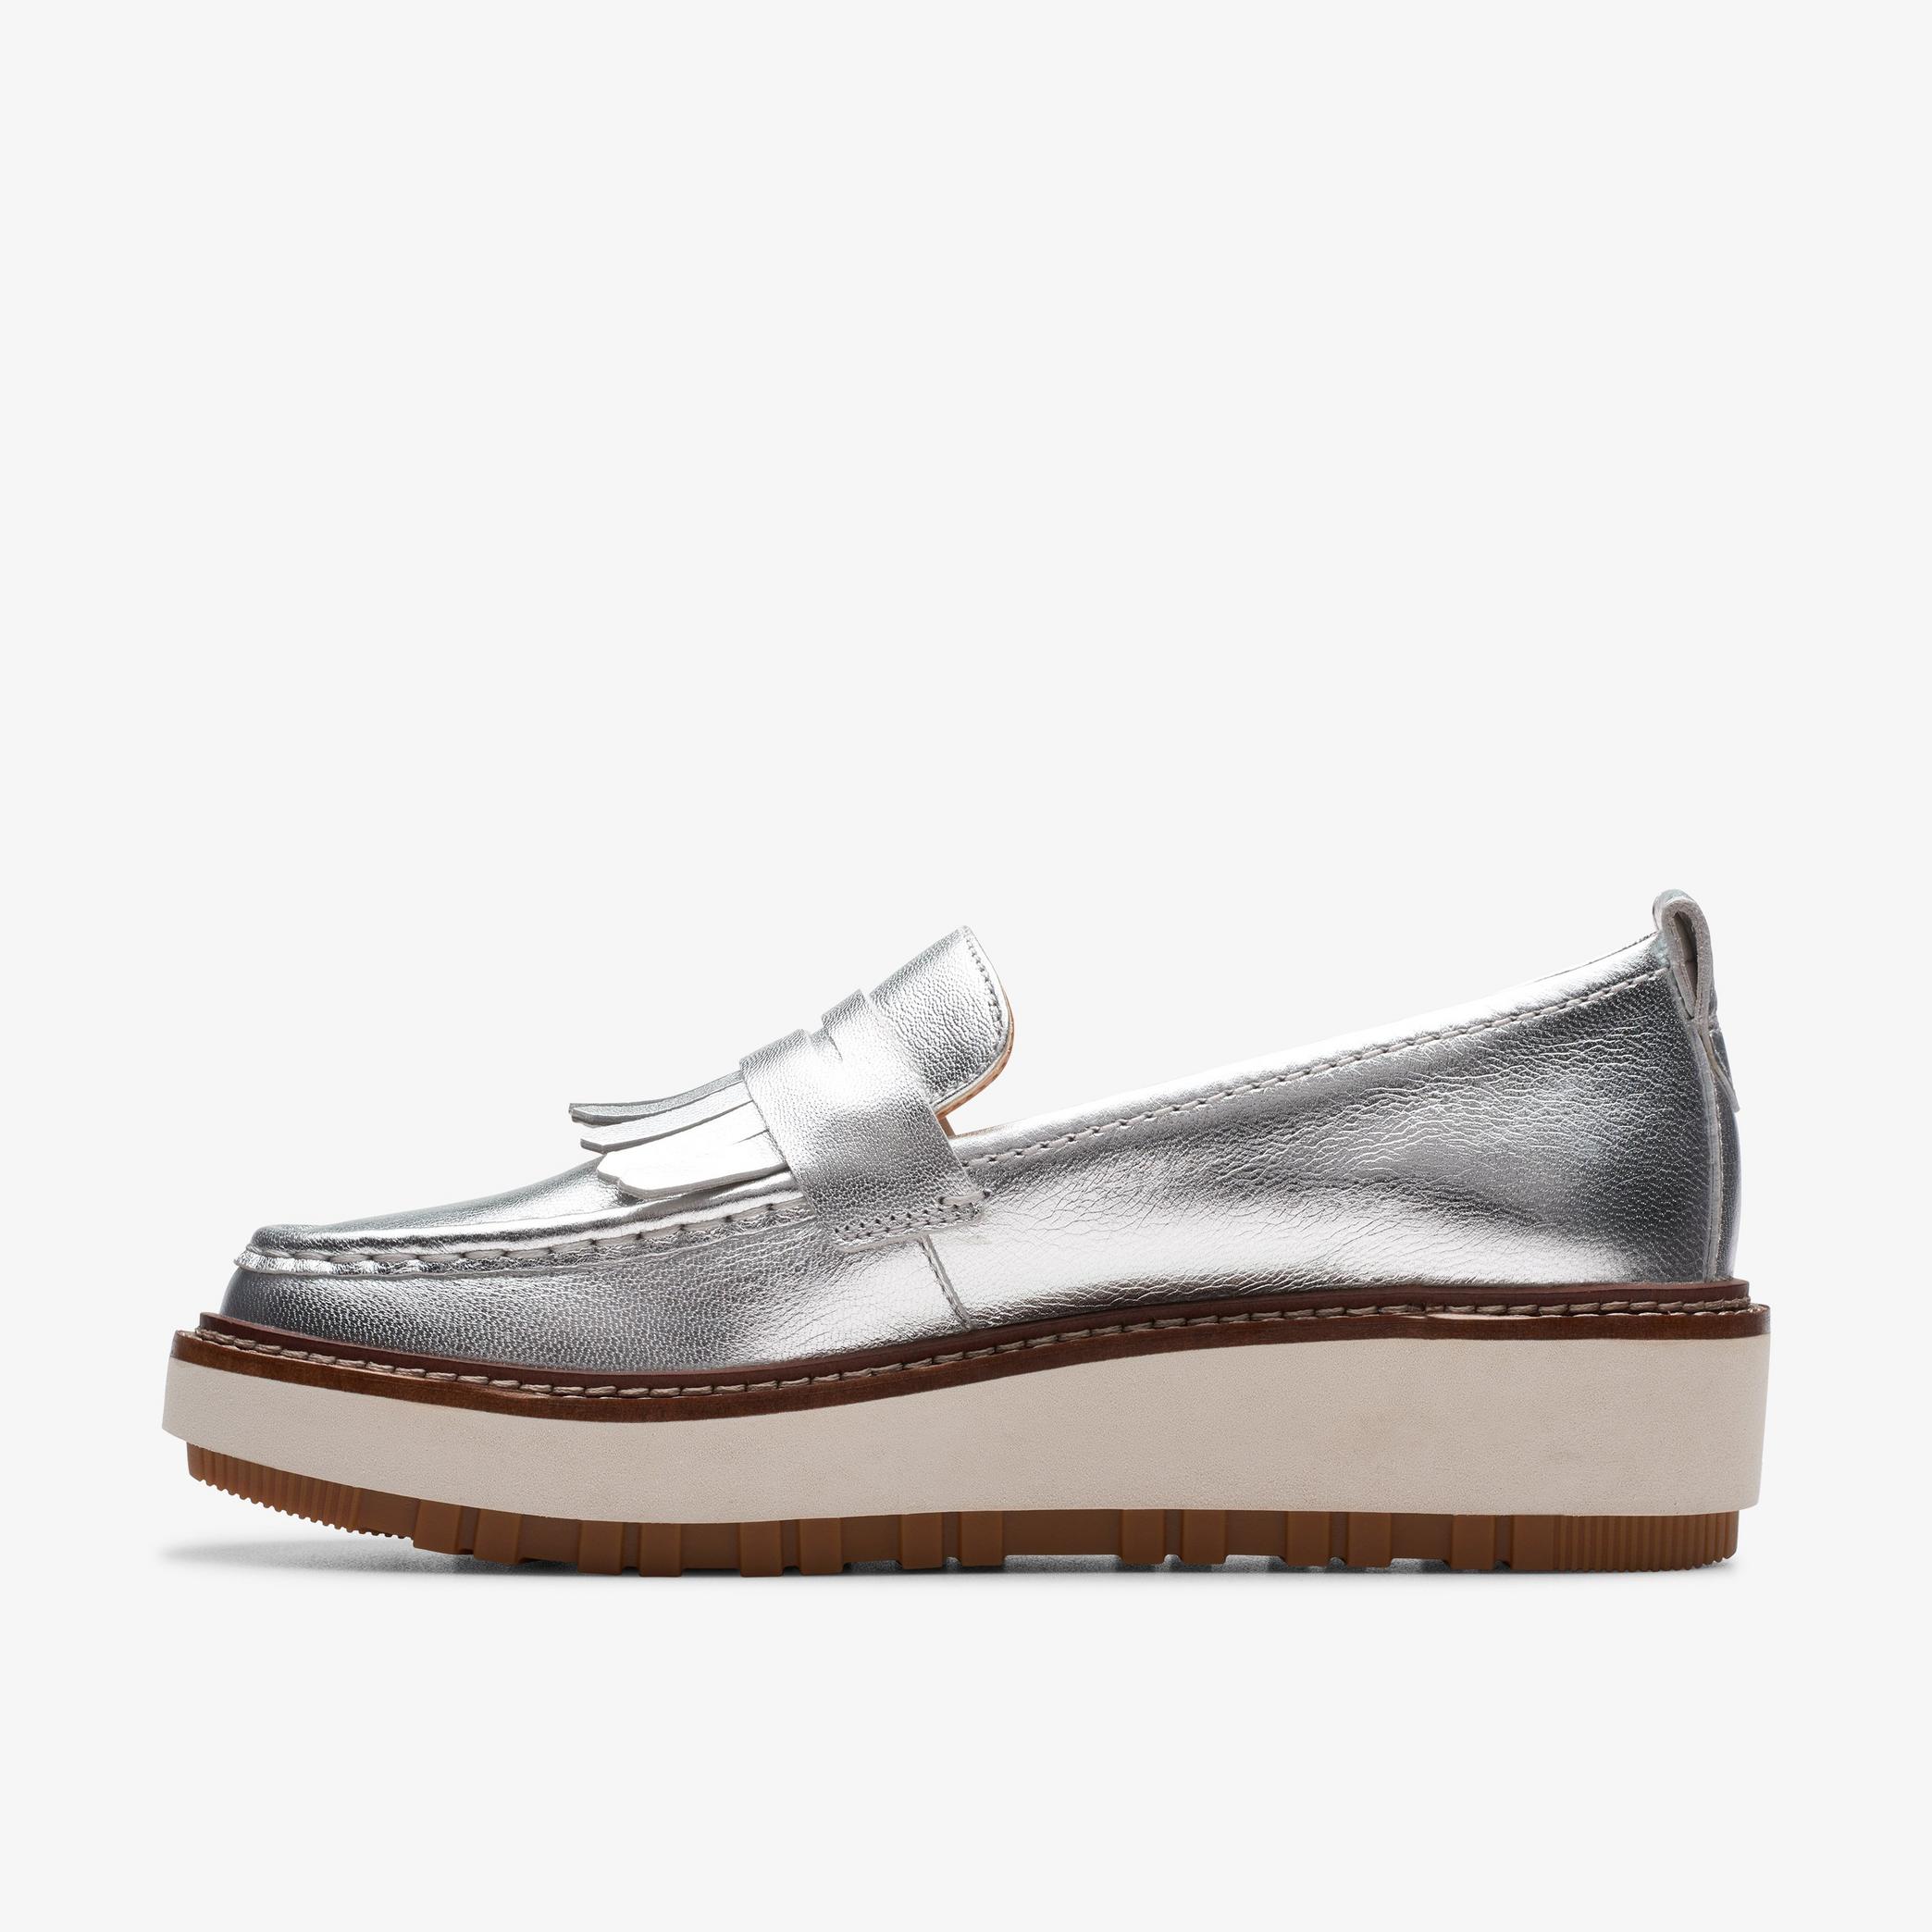 Orianna Loafer Silver Metallic Loafers, view 2 of 6